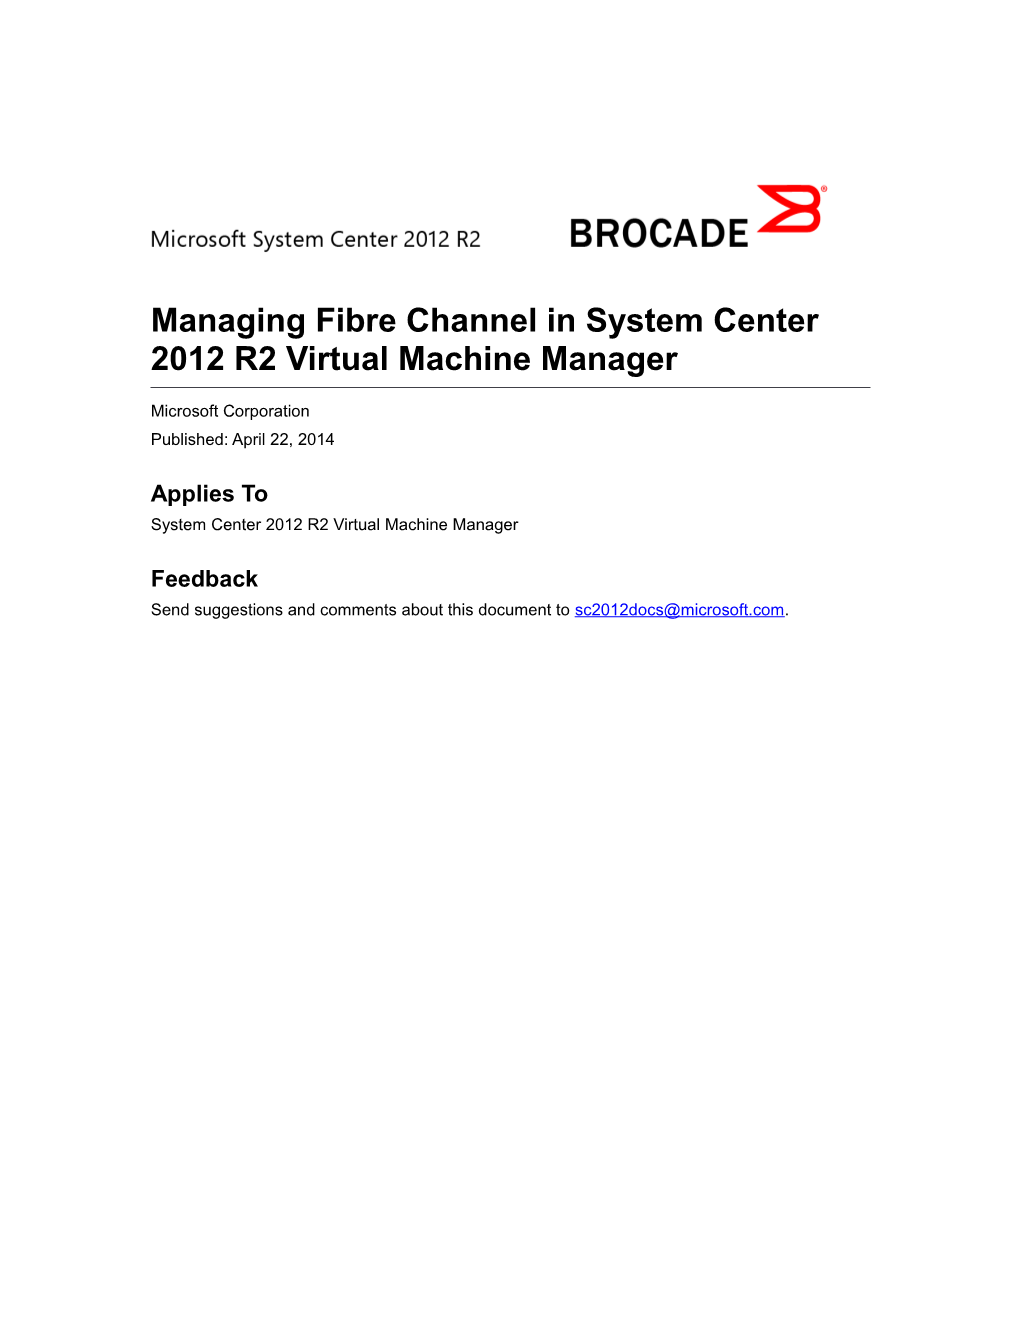 Managing Fibre Channel in System Center 2012 R2 Virtual Machine Manager